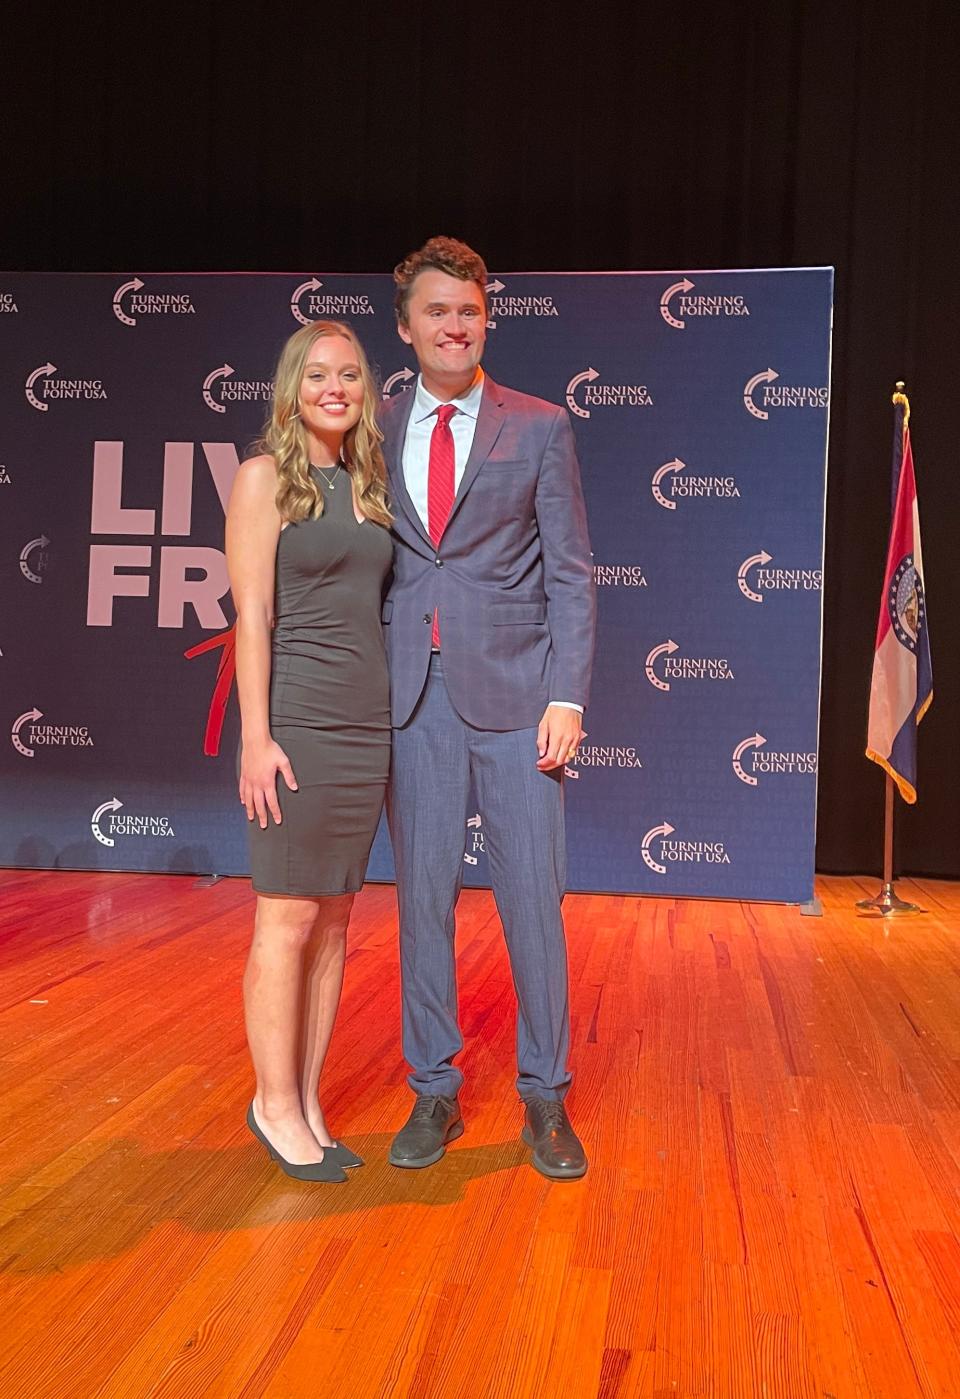 Charlie Kirk, founder of Turning Point USA, poses for a photo with Mattea Miller, president of MSU's Turning Point USA chapter at the Plaster Student Union Theater on the Missouri State University campus in Springfield on October 19, 2023.